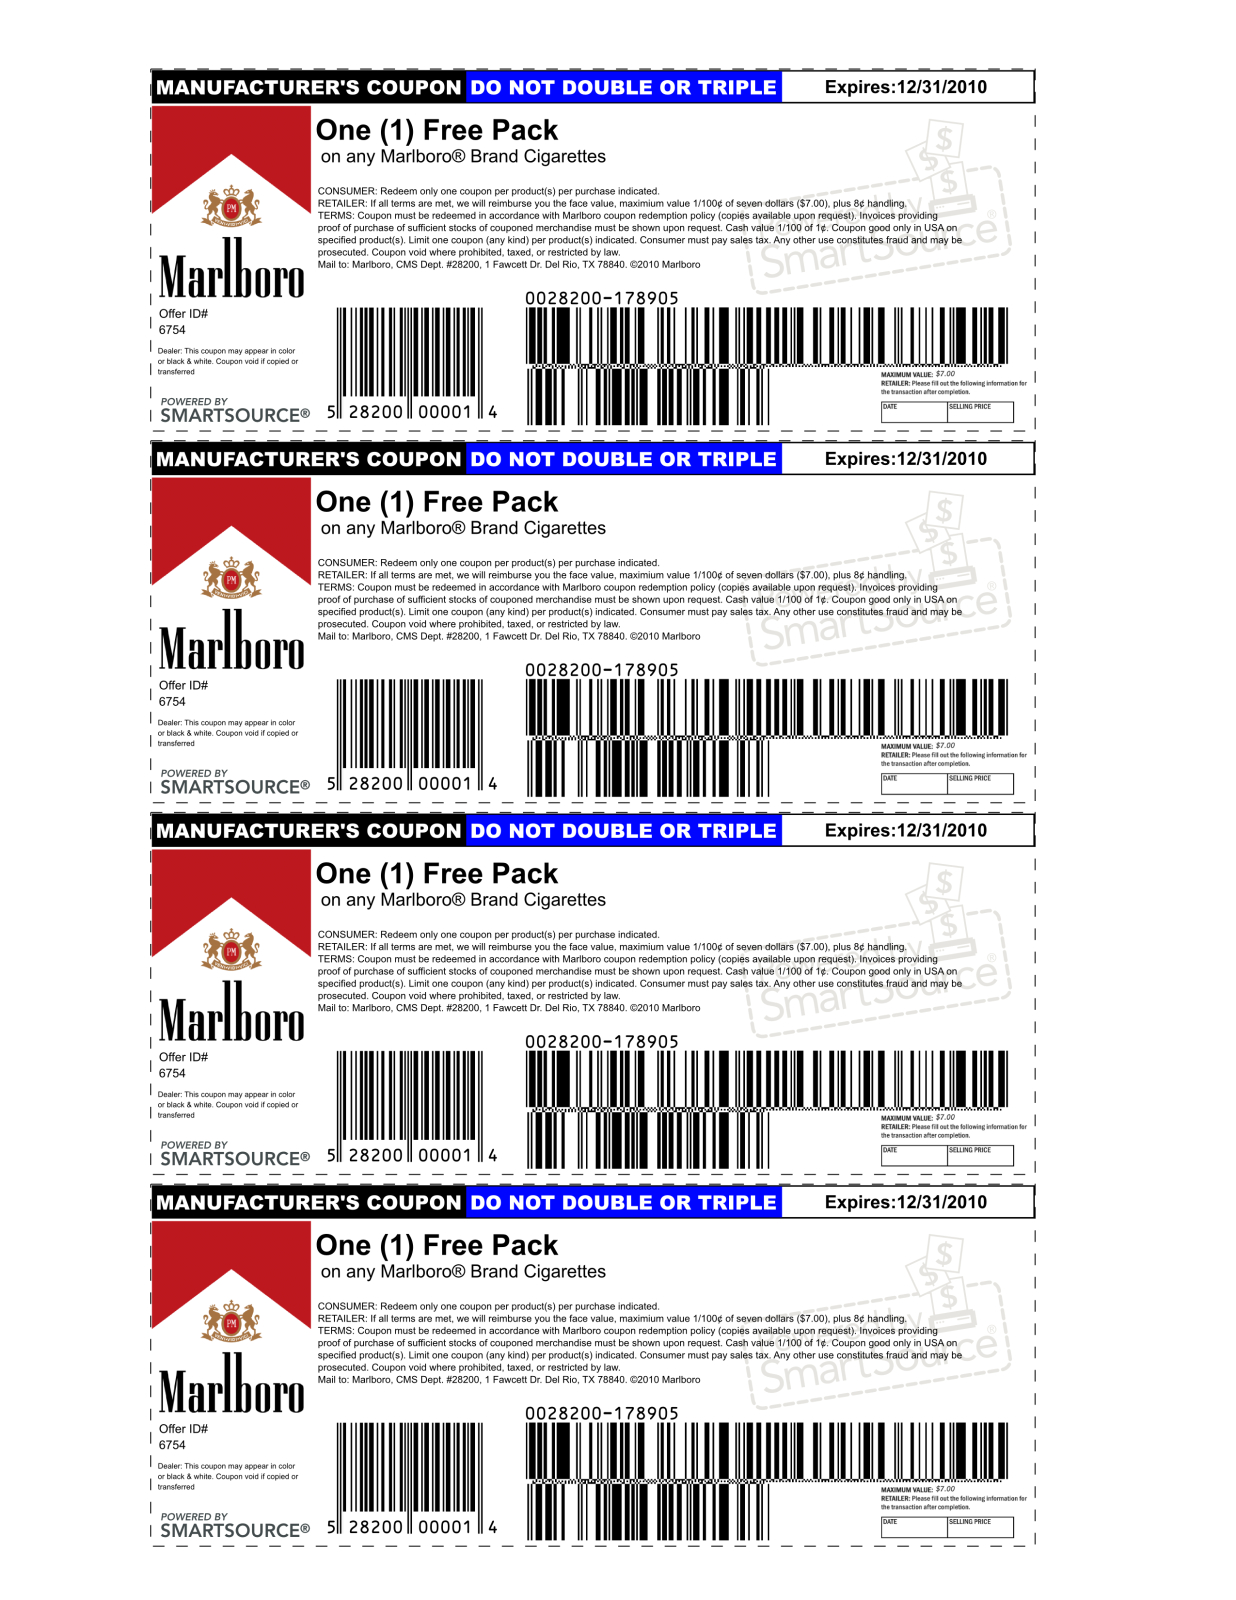 Marlboro Coupons Printable 2013 | Is Using A Possibly Fake Coupon - Free Printable Science Diet Coupons